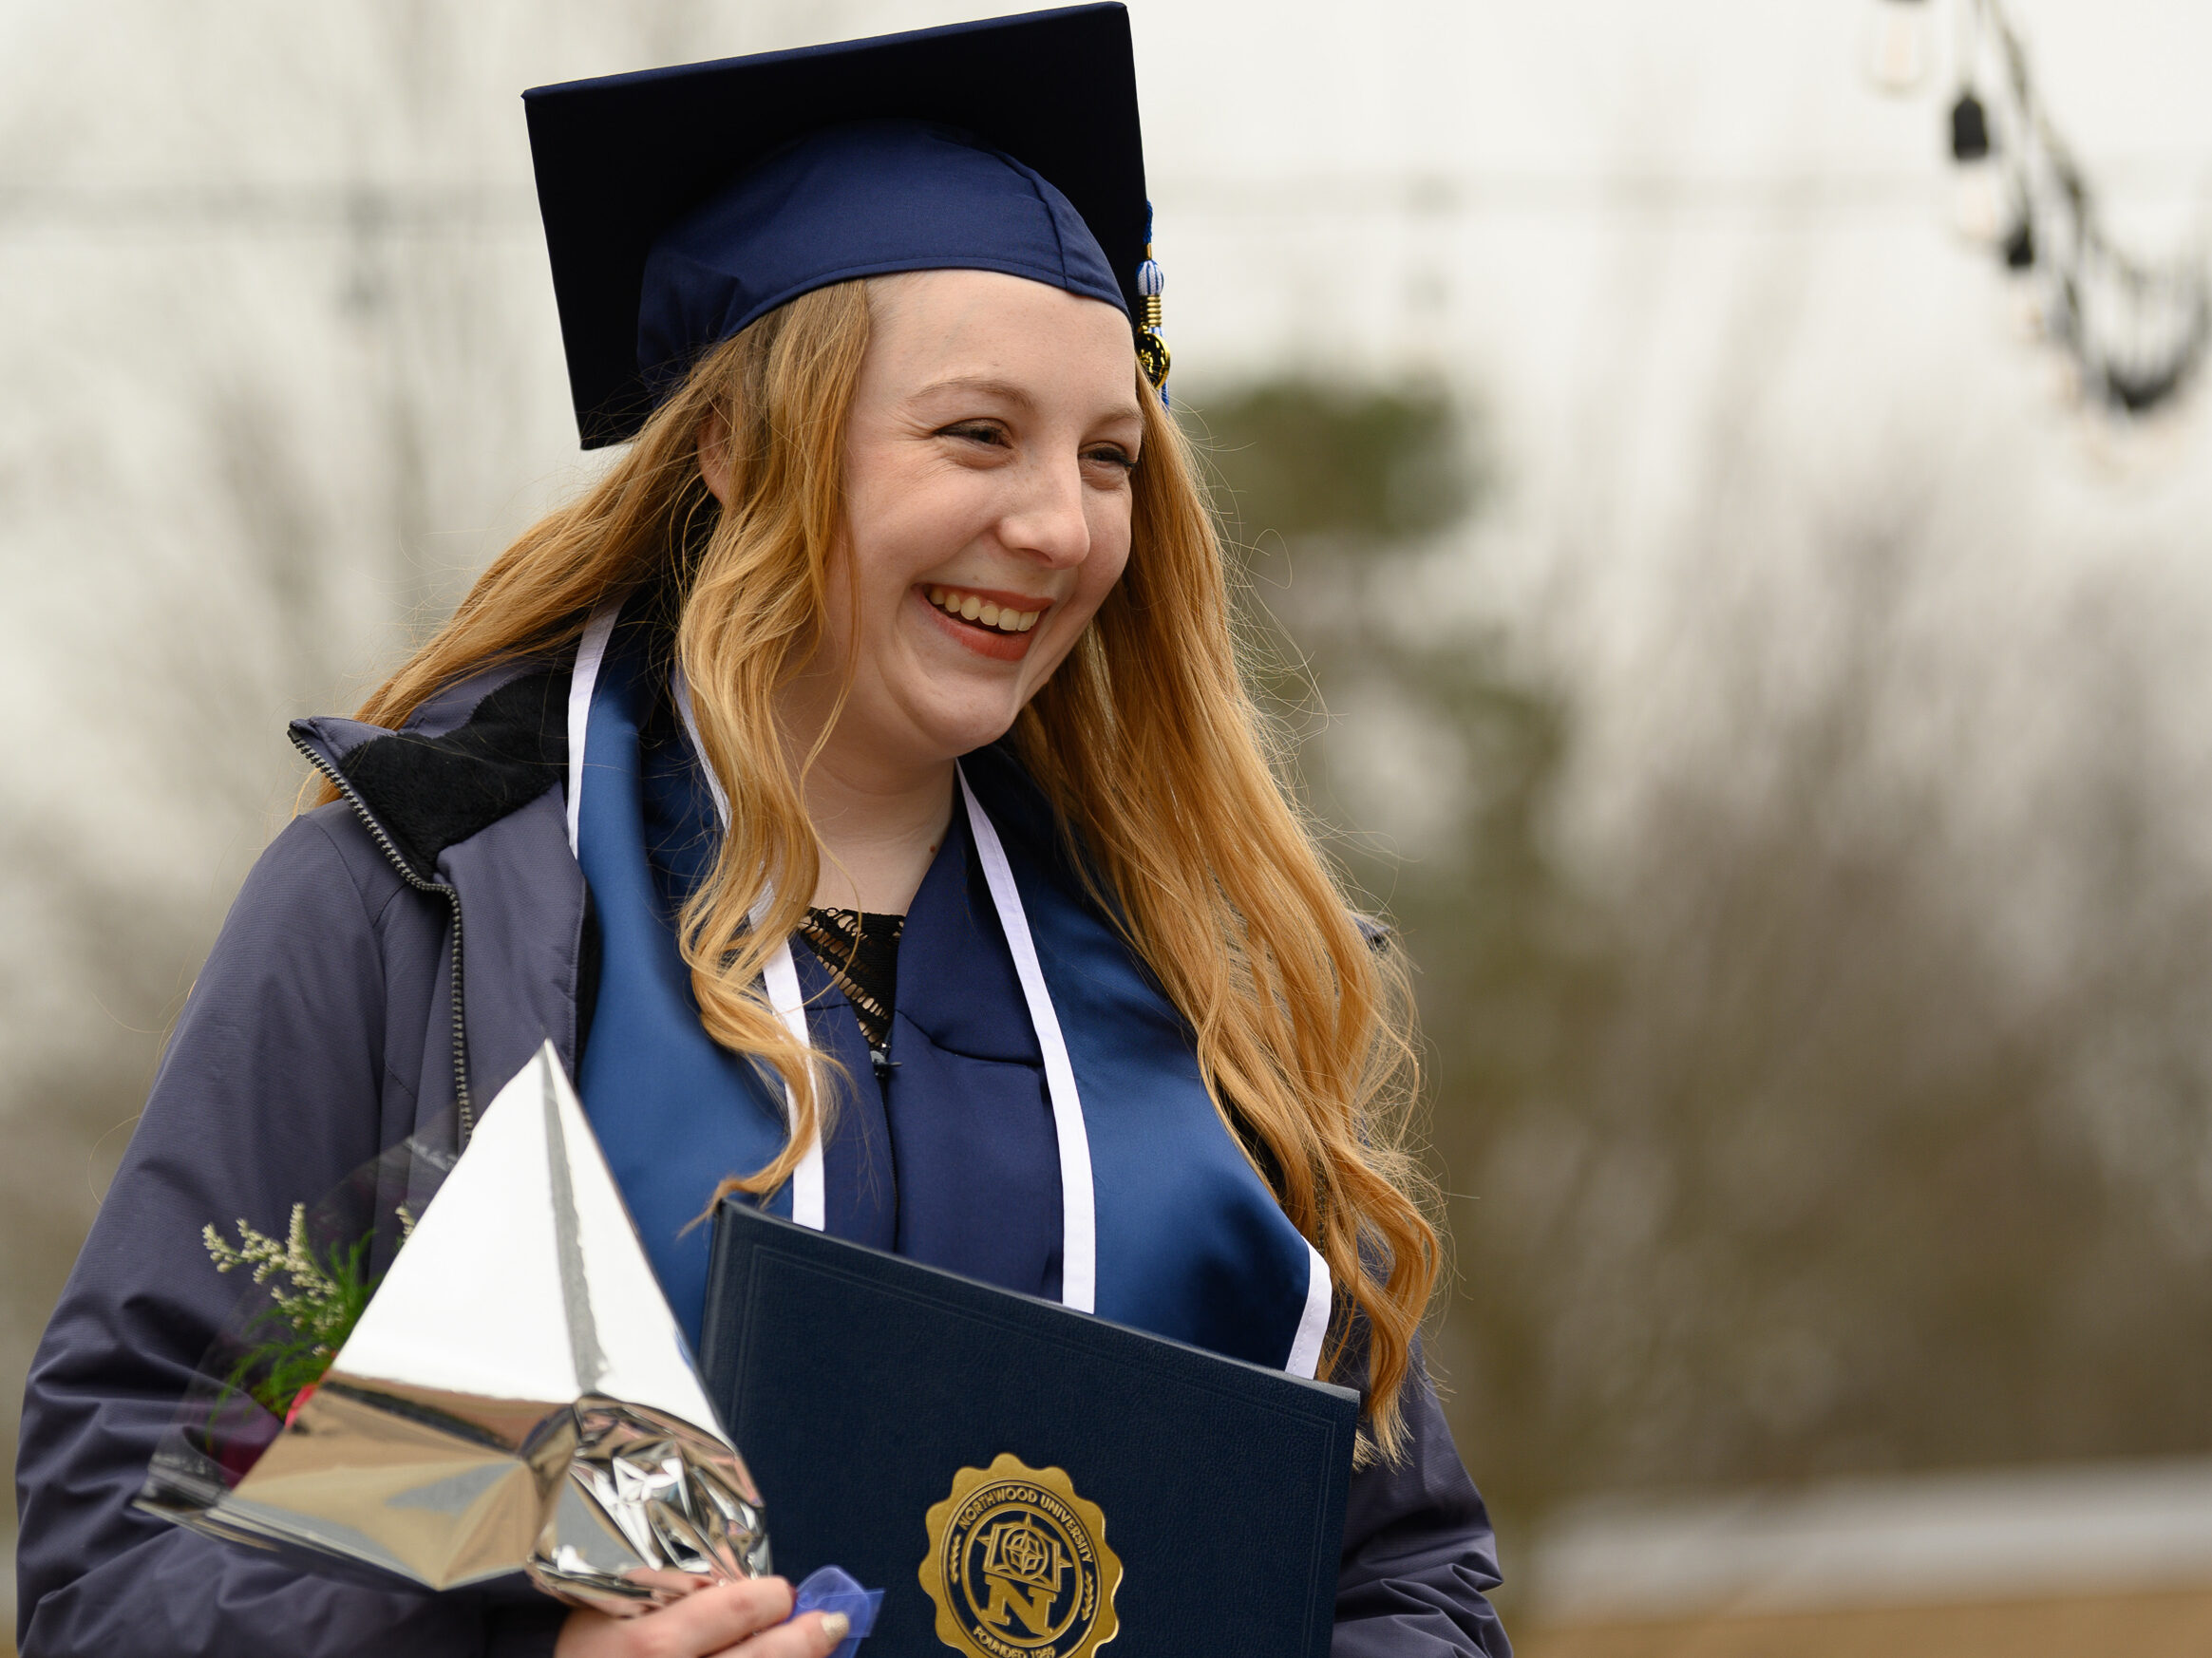 Woman smiling in cap and gown while holding flowers and her diploma